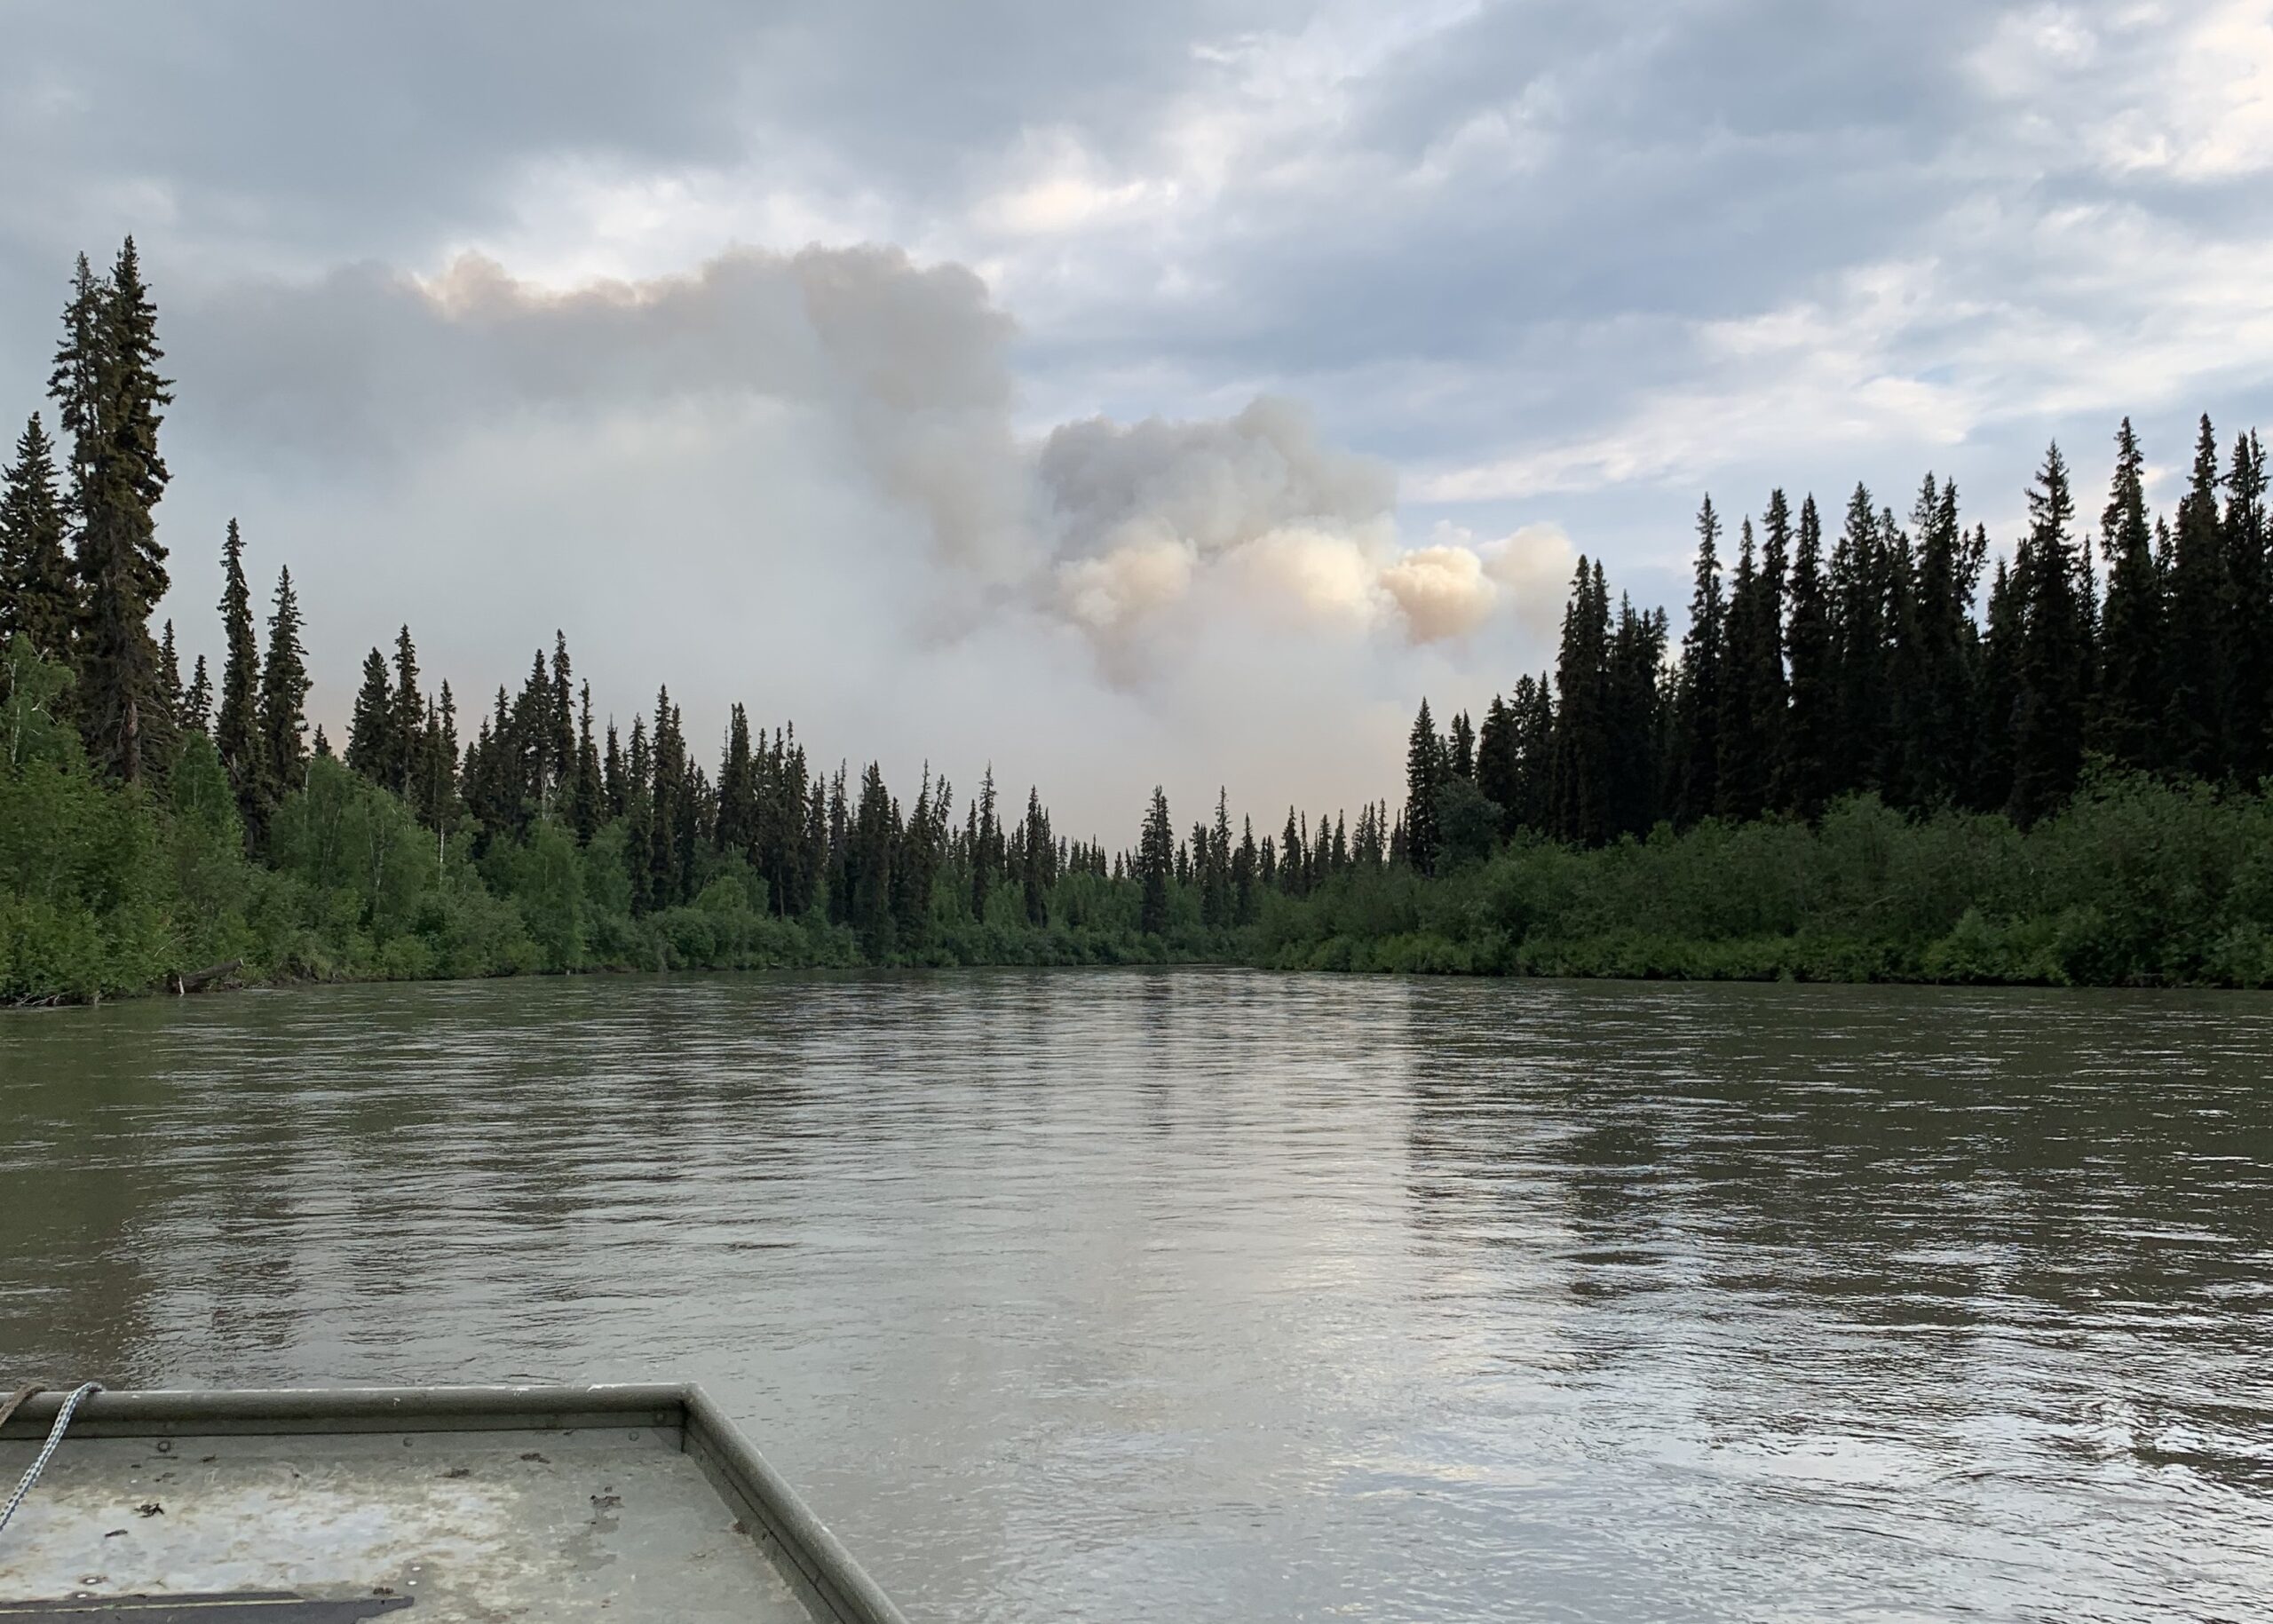 A Firsthand Perspective on Wildland Fires in Alaska, and a Tribute to the Few Who Fight Them